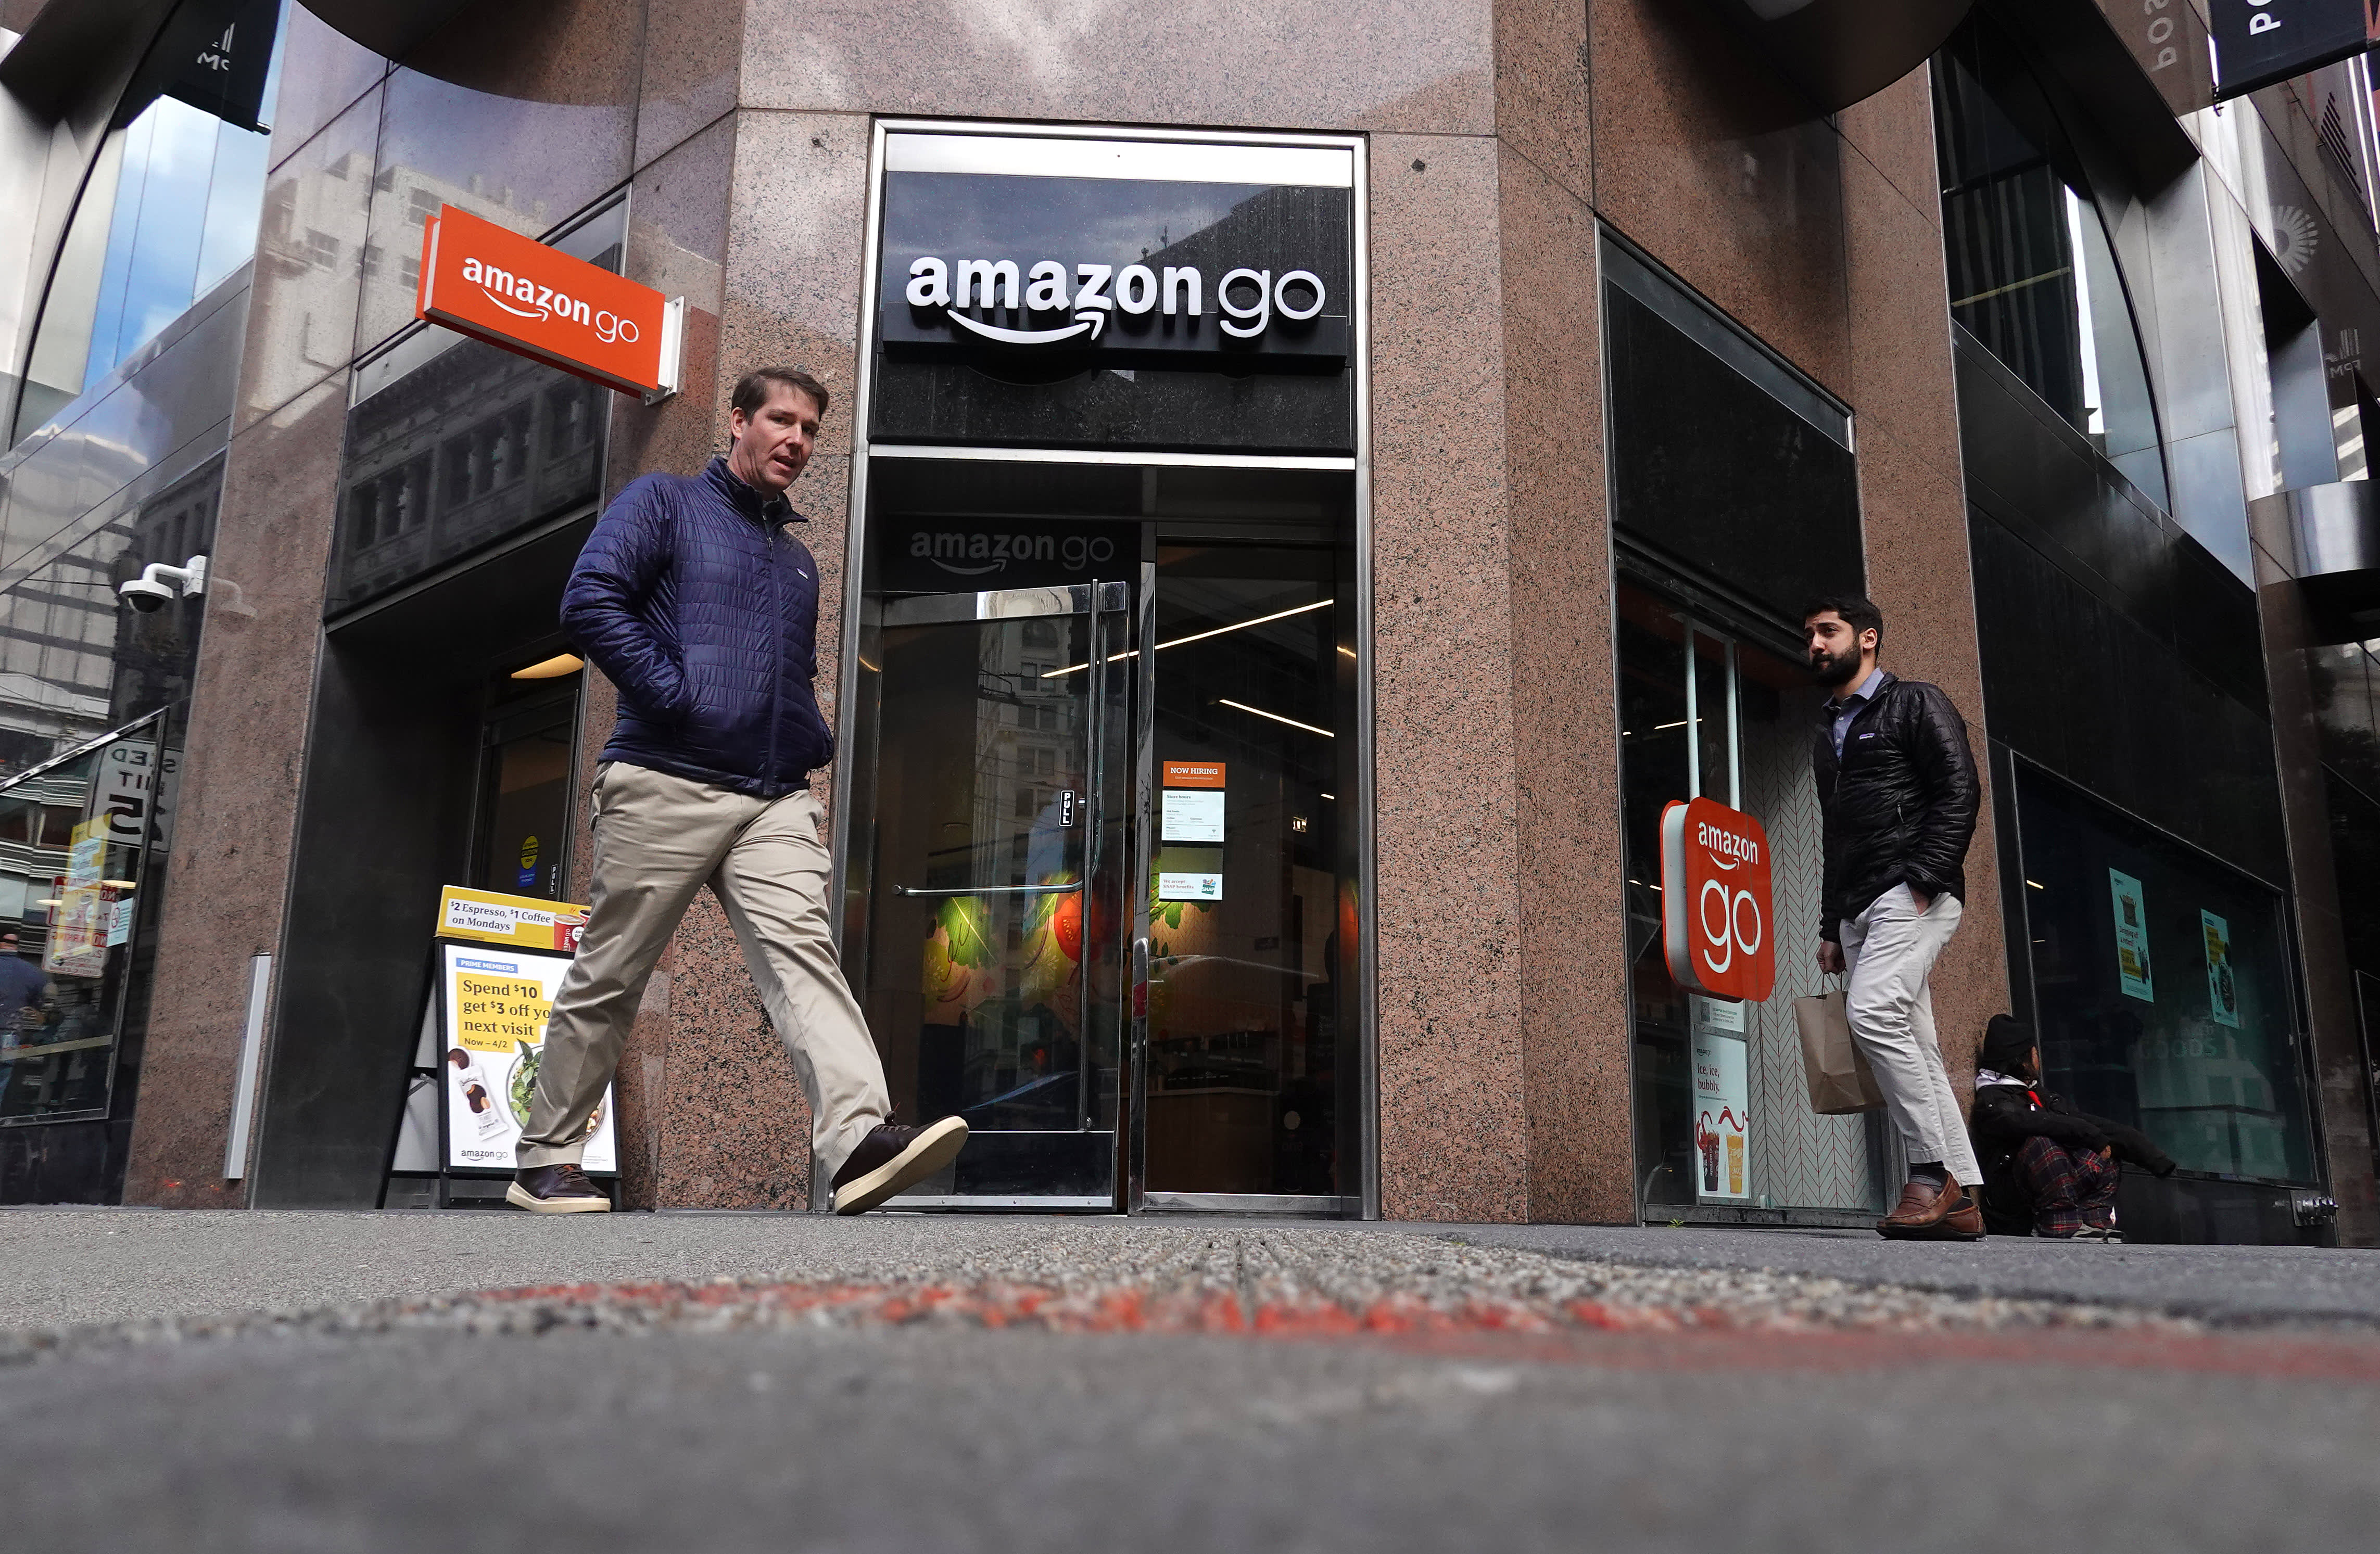 Wall Street analysts say Amazon is still a buy, but investors should ‘stay patient’ on AWS